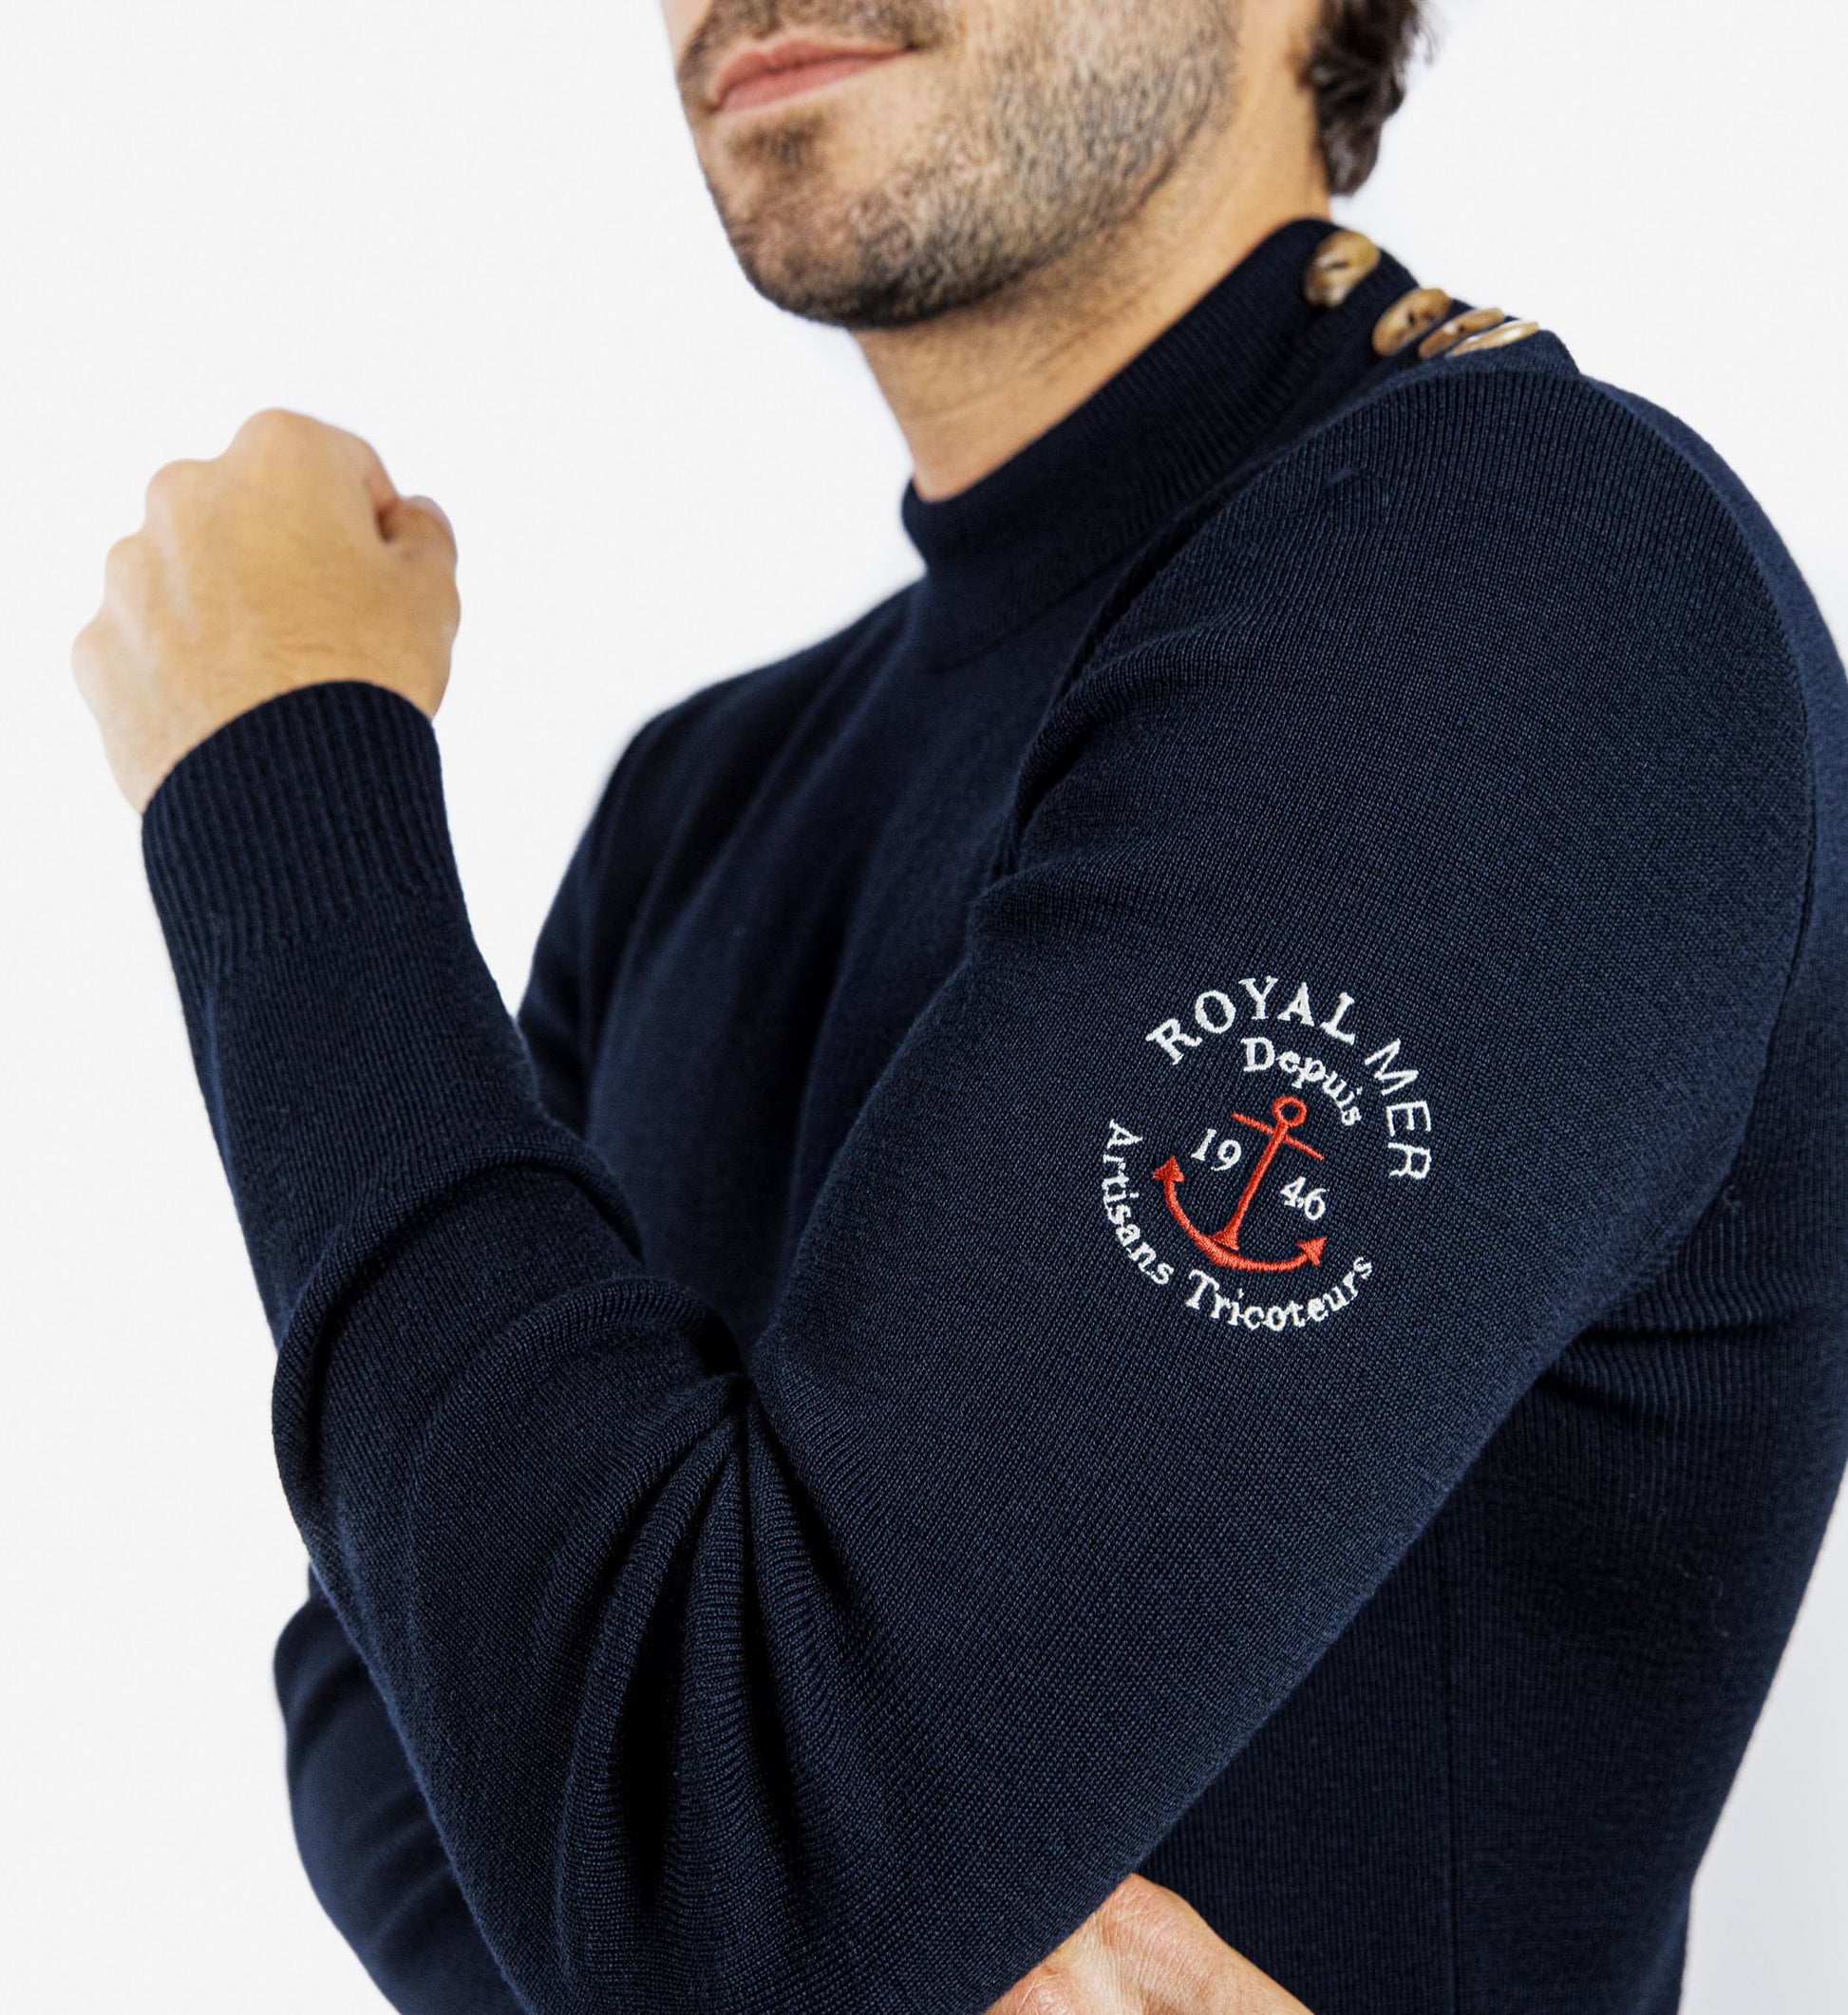 Pull marin avec broderie ancre